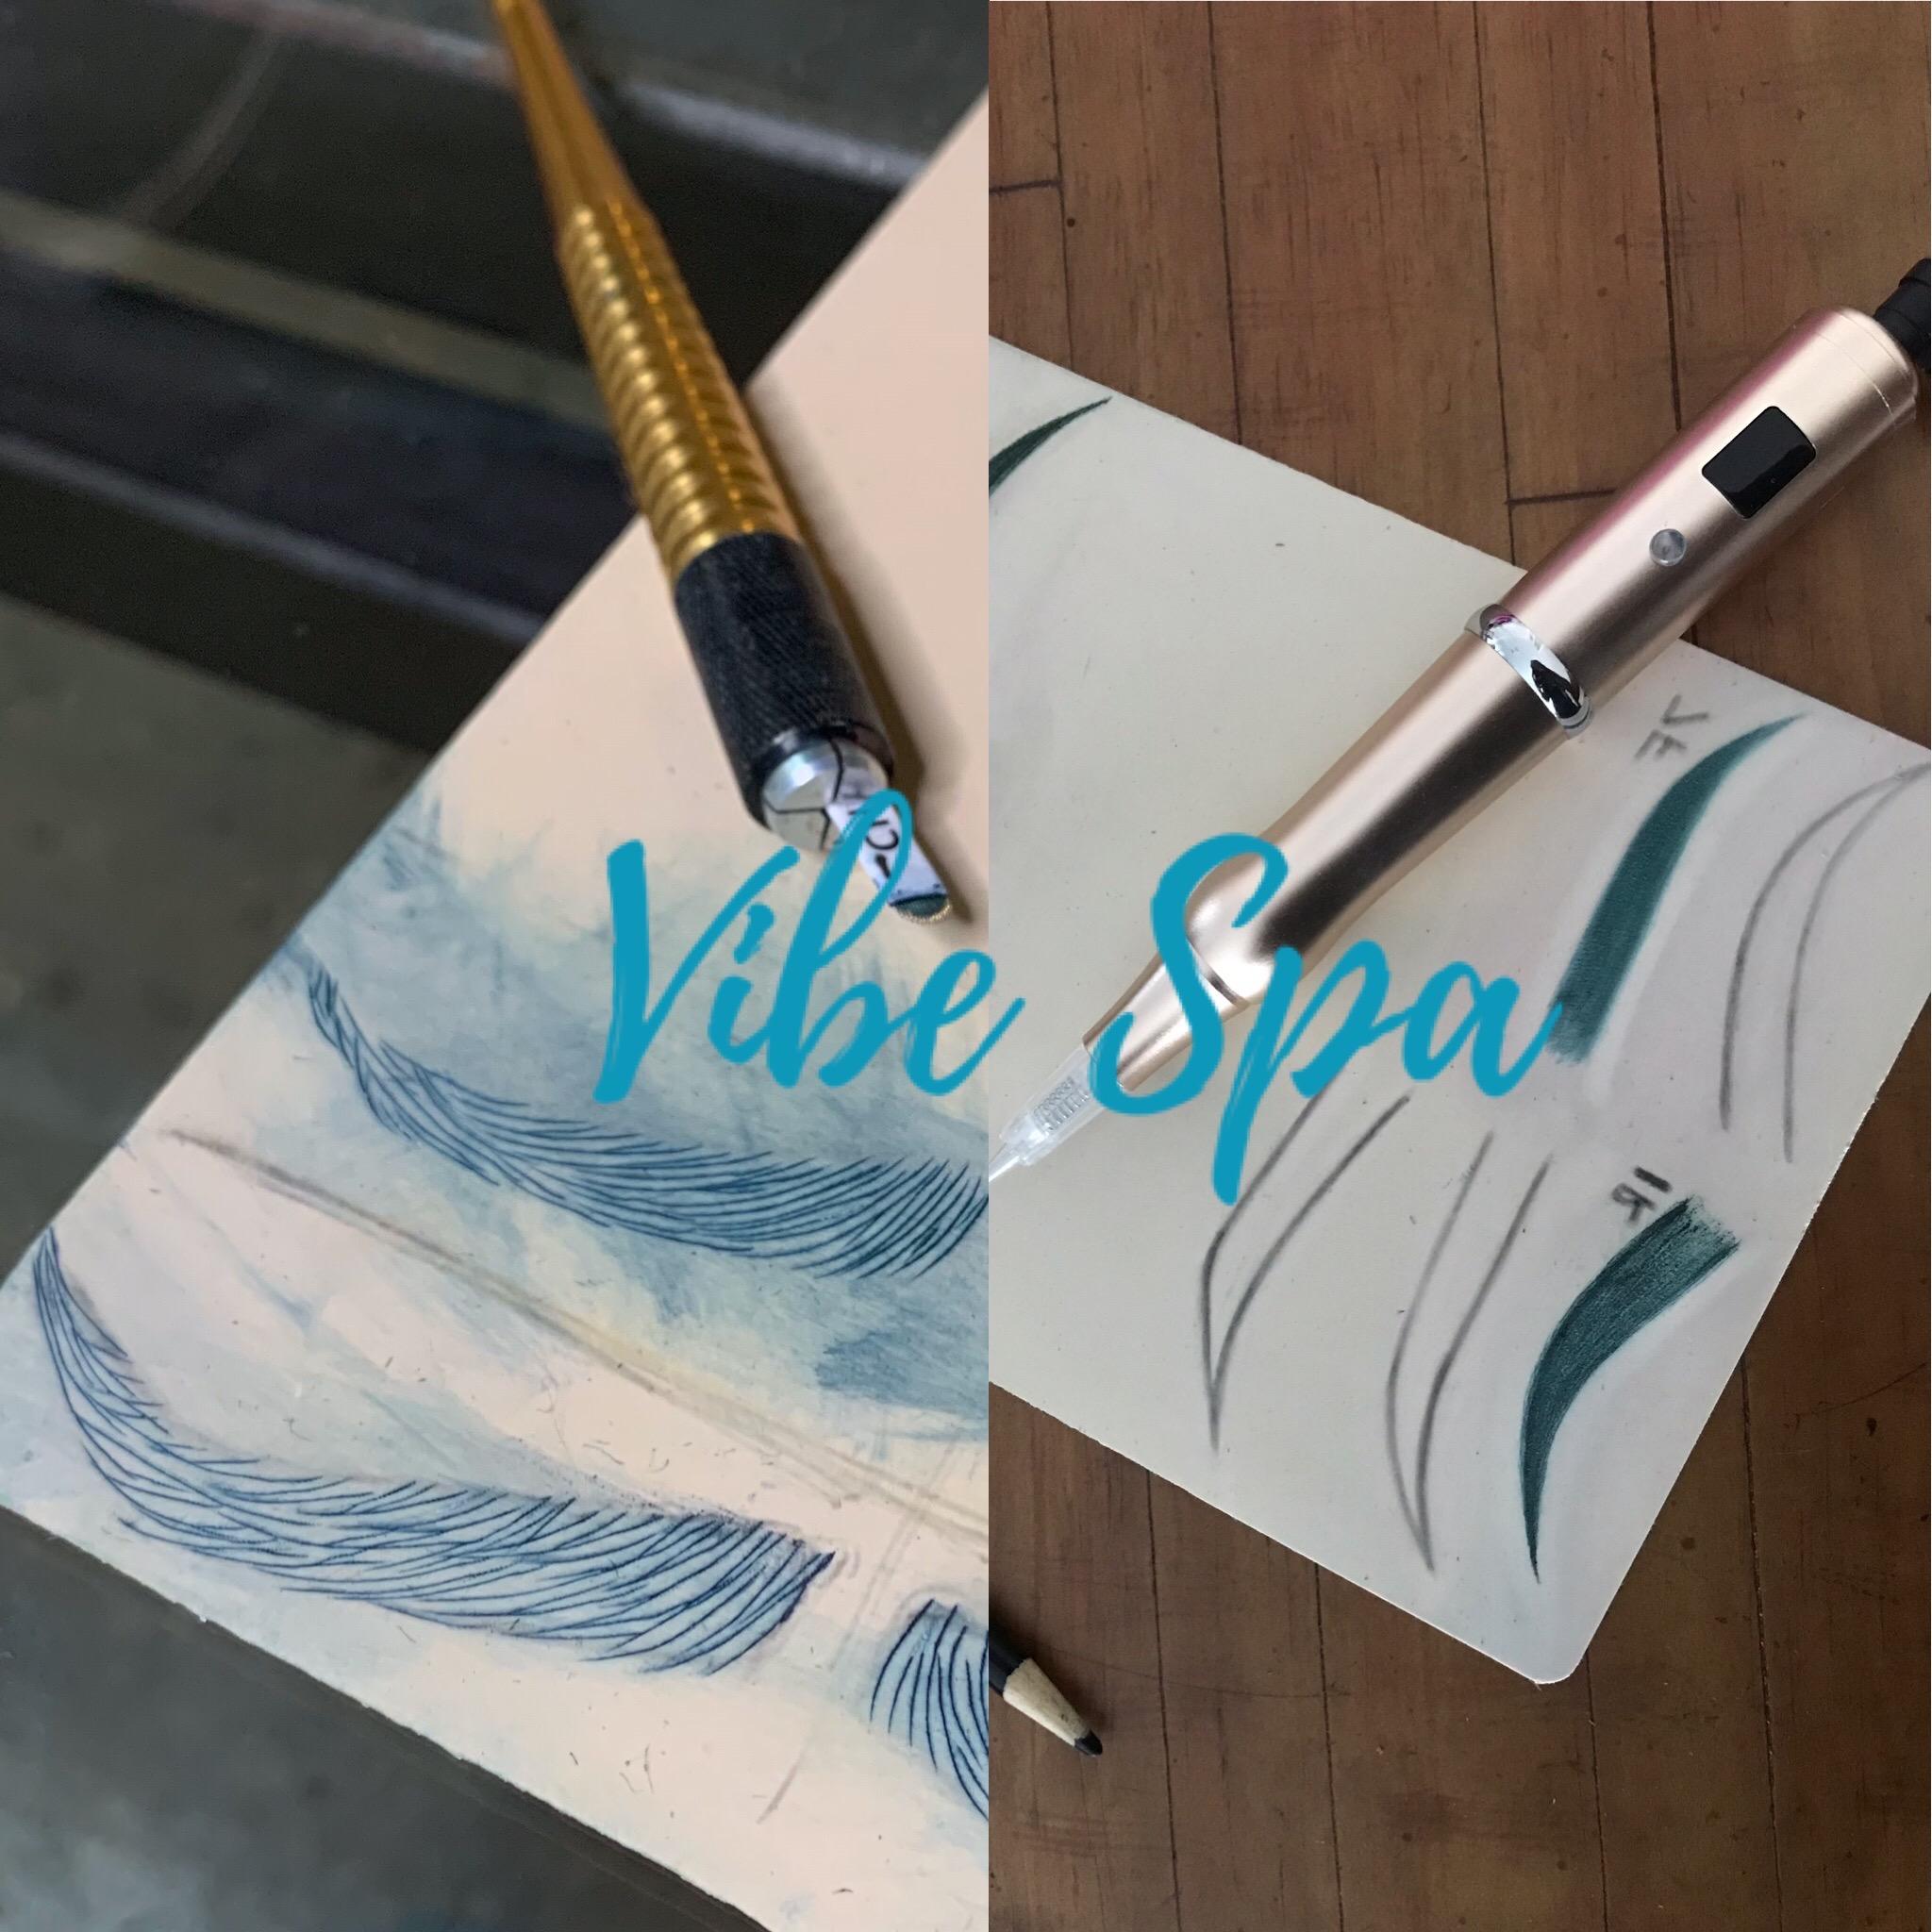 2-Day MICROBLADING & OMBRÉ SHADING DUO TRAINING by Vibe Spa & Academy